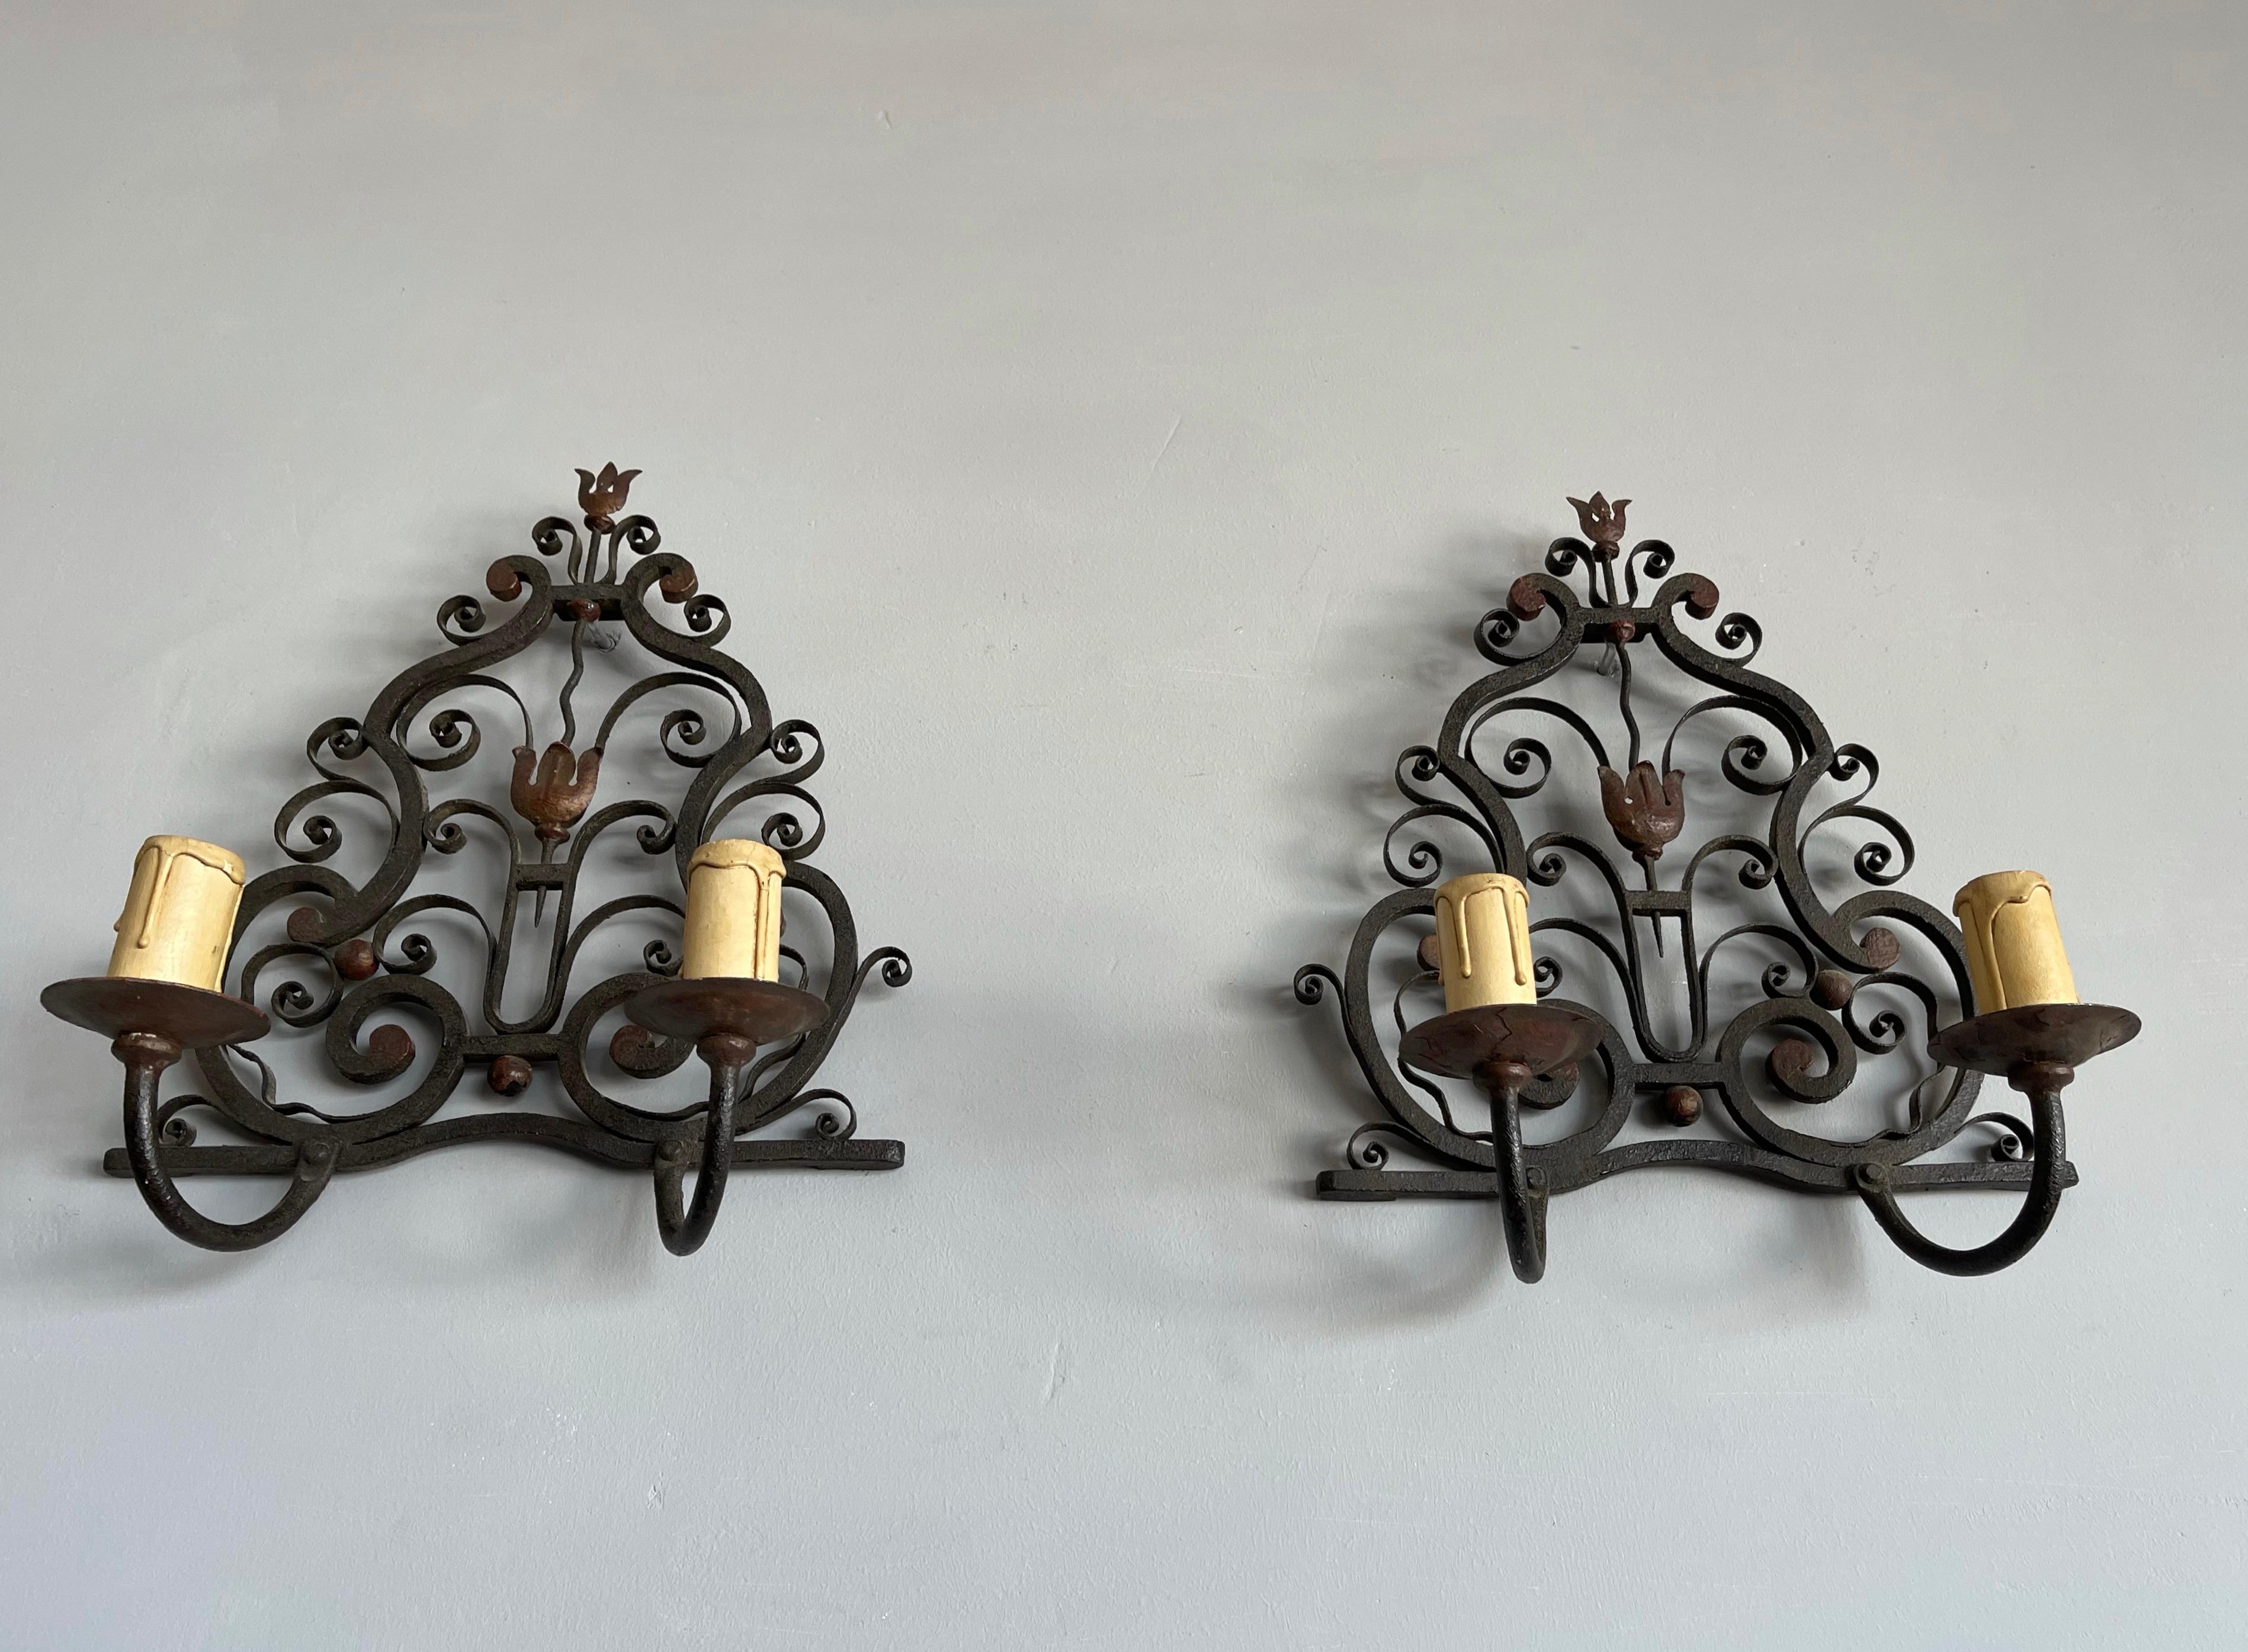 Stylish and perfectly hand-forged iron wall sconces in the style of Gilbert Poillerat.

This rare and all handcrafted pair of wall sconces is in very good condition. The wonderful and perfectly symmetrical flowing design of these growing flower